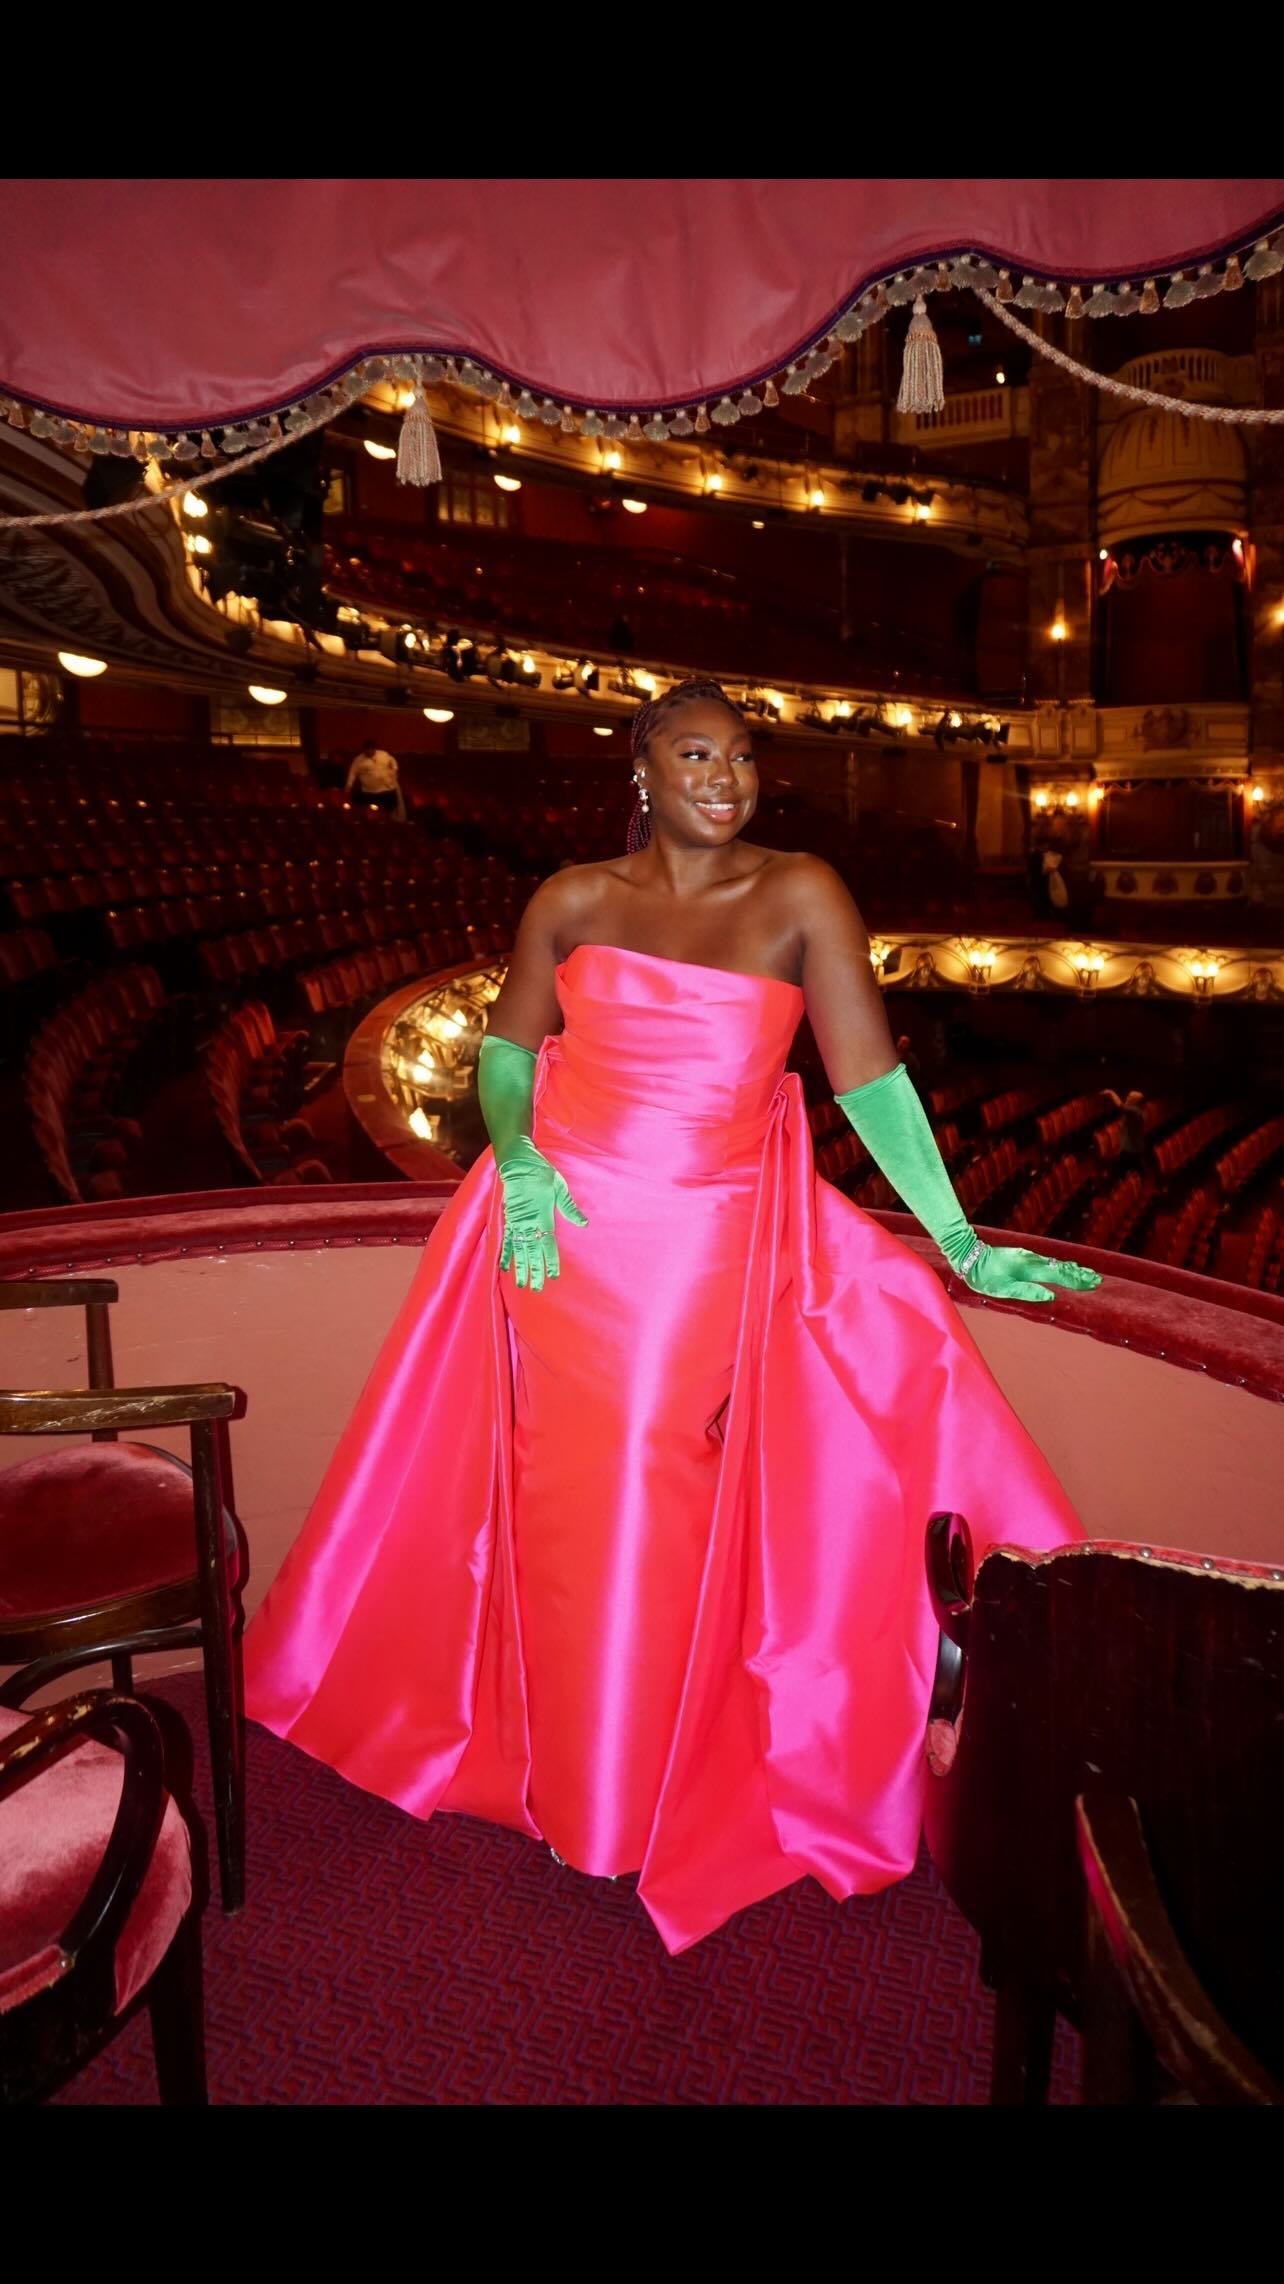 A Dream Night At The Opera… 🥹💖

- Dress @solacelondon (Rental Available)
- Clutch @ysl 
- Heels @machandmach
- Jewellery: bracelet @swarovski earrings @chanelofficial ear cuff @zara & ring @ltfinale 
- Body Glow @fentybeauty

Thank you @byrotation for such a beautiful night at the @englishnationalopera with such wonderful company!
@sincerelyoghosa You and I ATE!!! @emmapaton___ @marutavelsha you looked amazing 😍😍 

#whatsmineisyours #blackgirlluxury #midsizestyle #plussizefashion #size16 #luxuryoncurves #curvyfashionblogger #fashionstylist